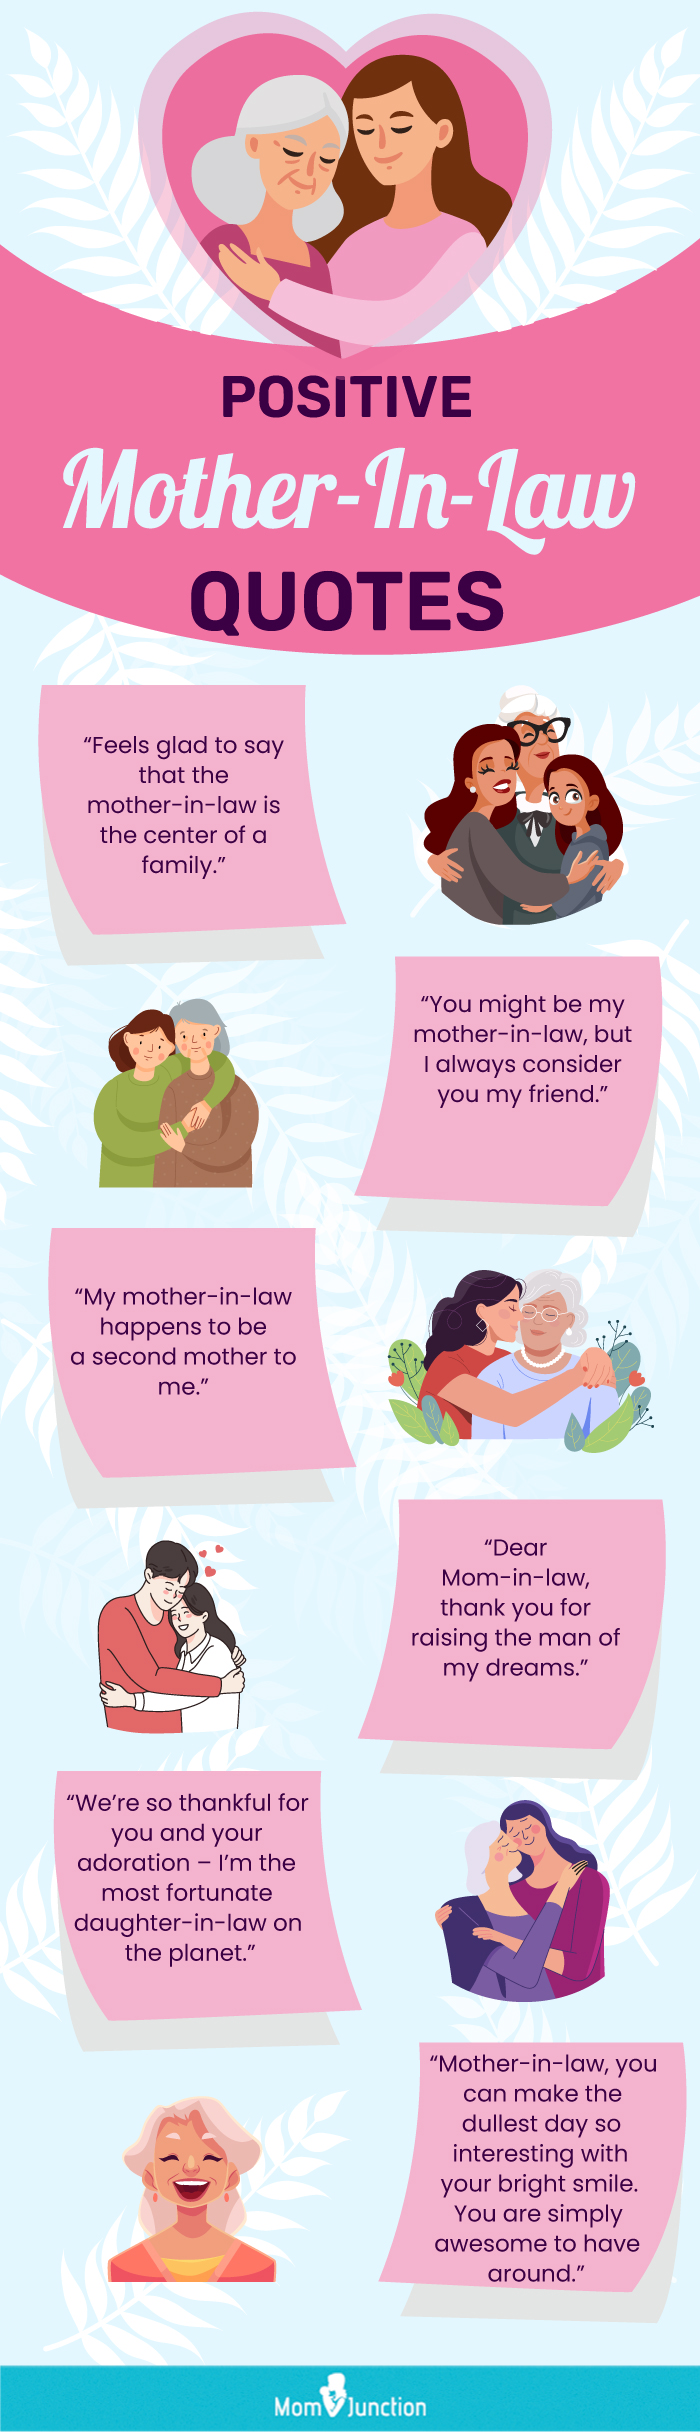 quotes about mother in law (infographic)